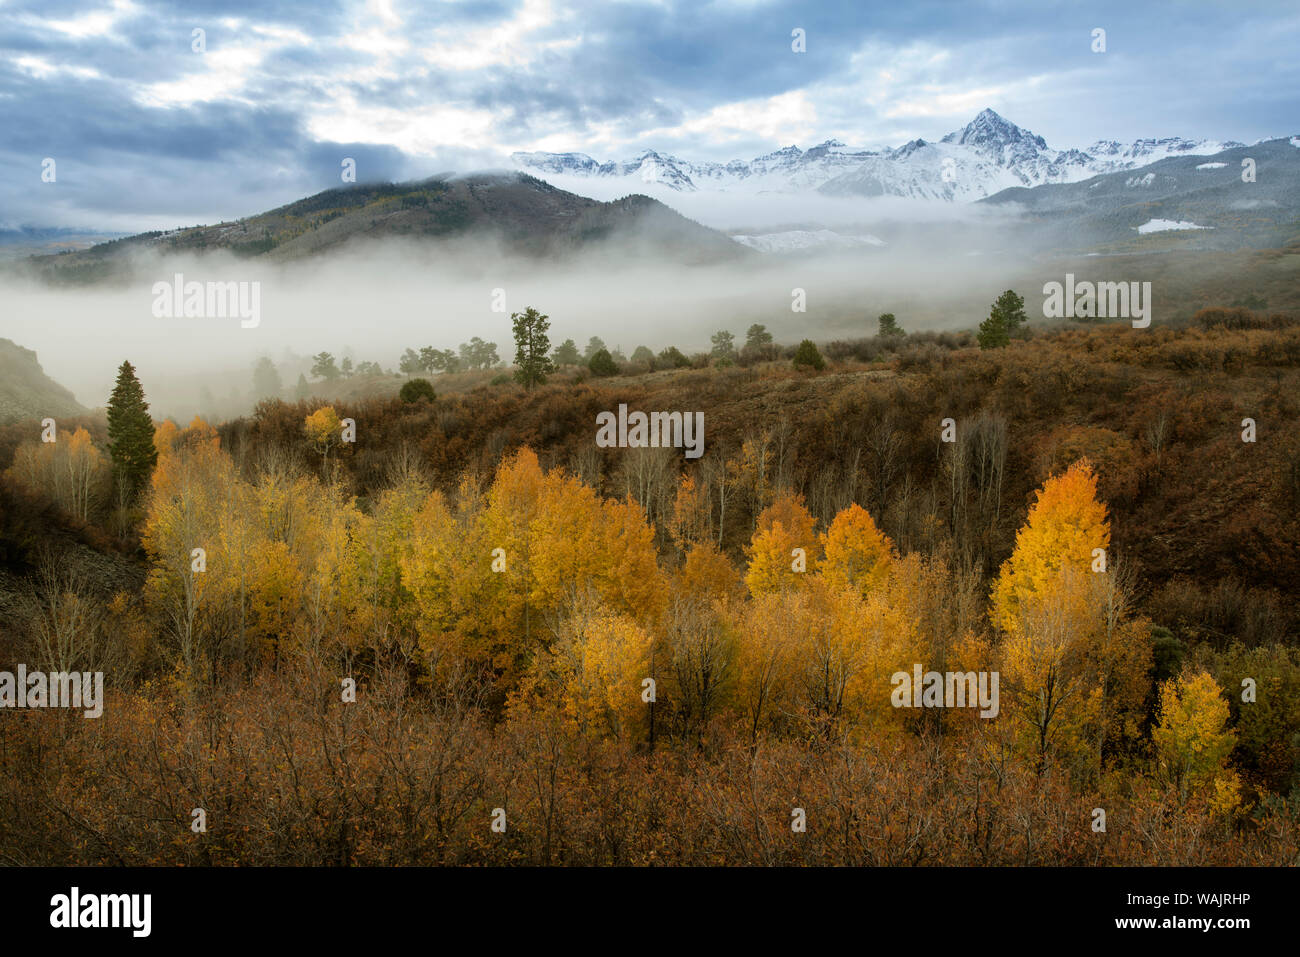 USA, Colorado, San Juan Mountains. Morning fog on mountain and forest landscape. Credit as: Don Grall / Jaynes Gallery / DanitaDelimont.com Stock Photo